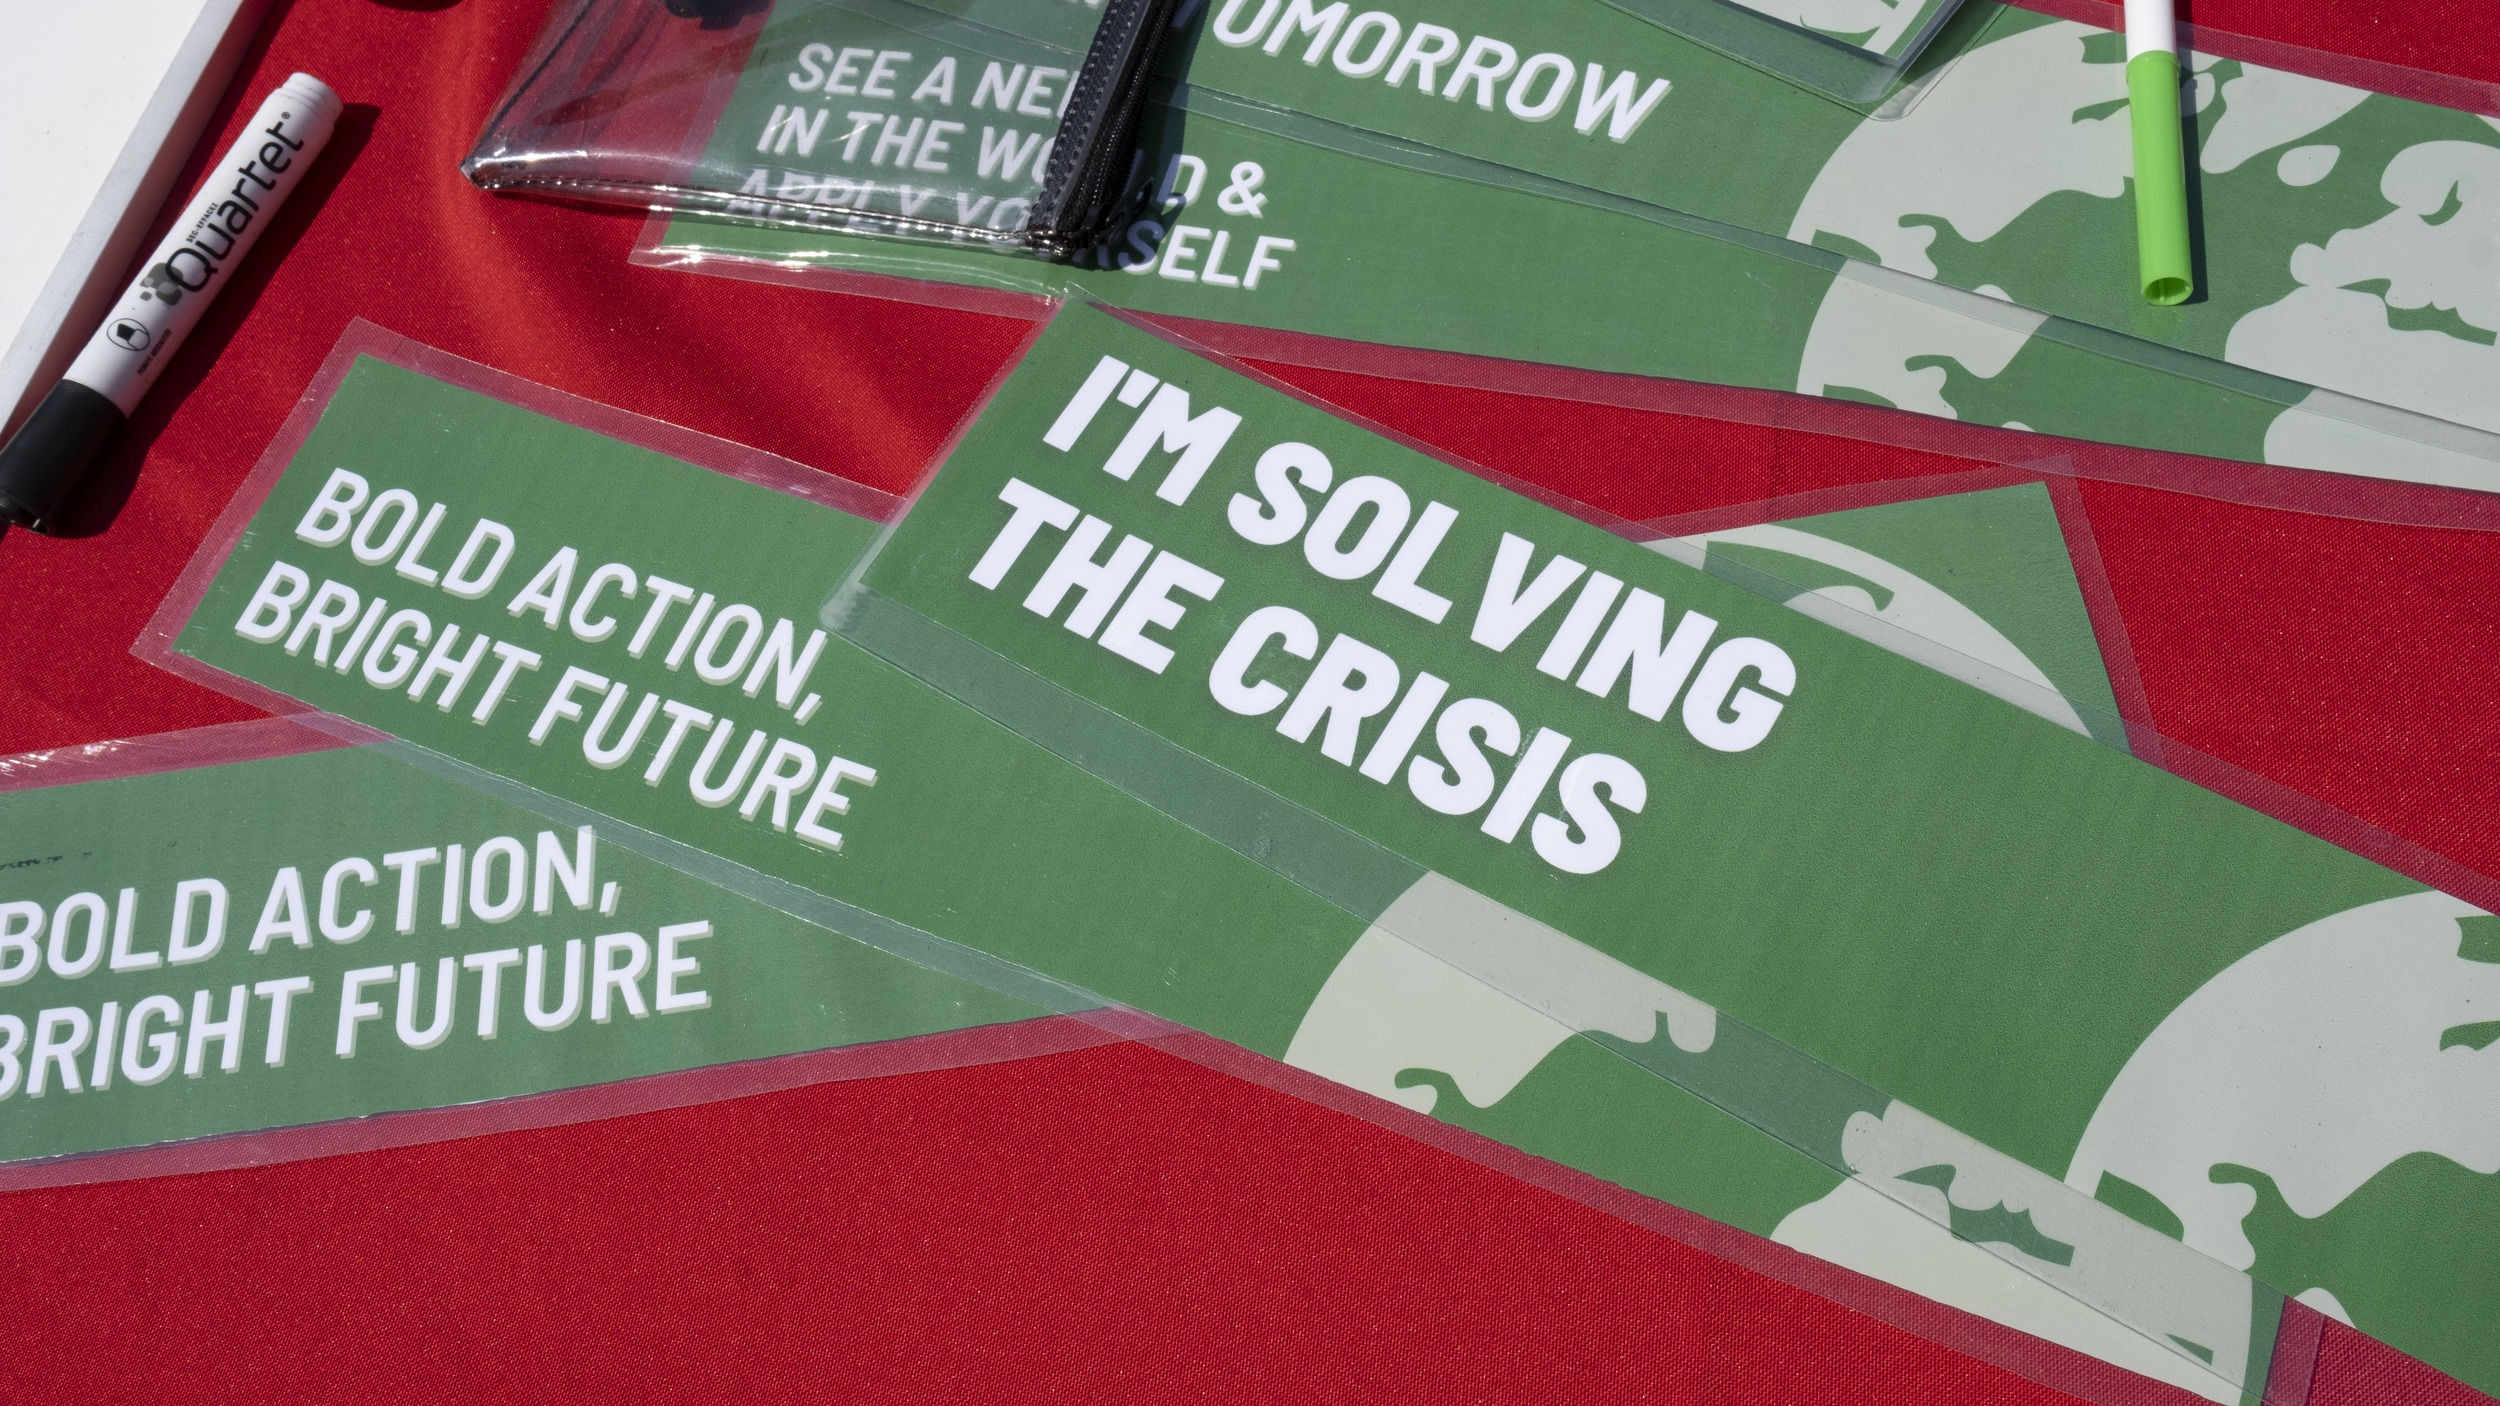 Print materials with messaging for solving climate change.